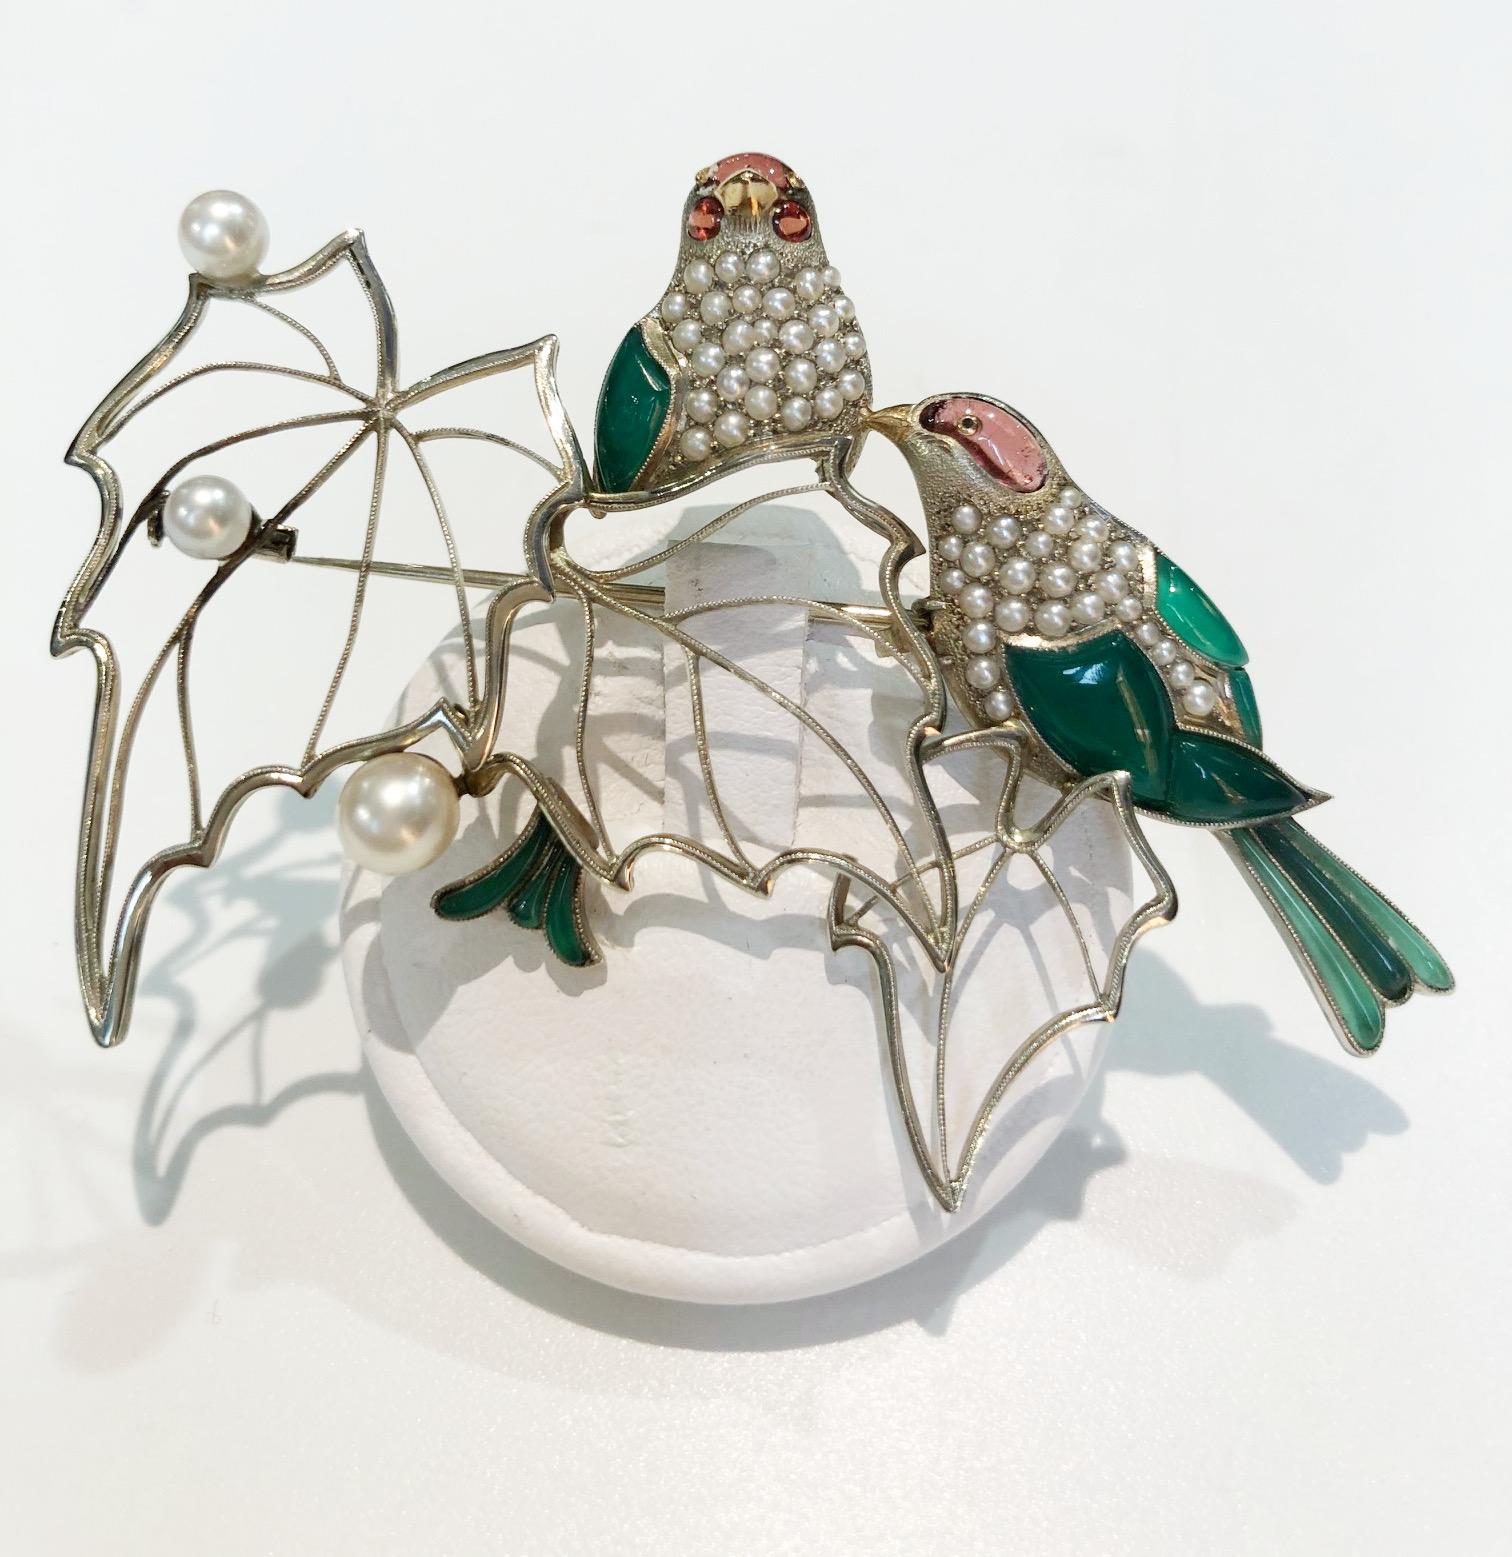 Vintage Venetian 18 karat gold birds and leaves brooch, with pearls, Chrysoprase stones and garnets, Italy 1950s 
Signed on the back
Length 7 cm
Height 4.5 cm